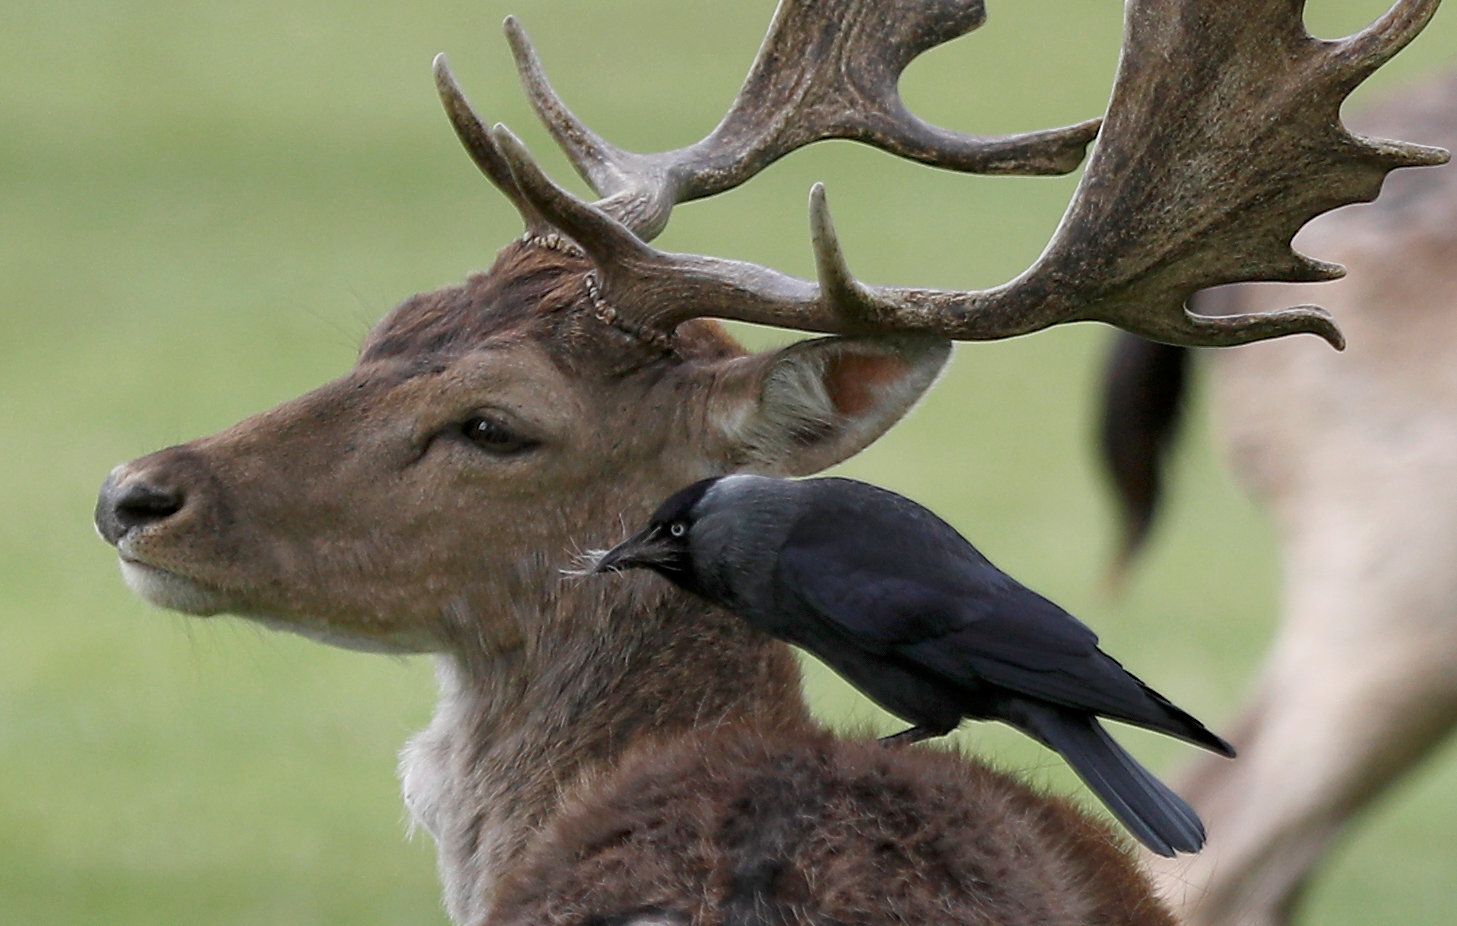 A bird sits and pulls fur from the back of a deer in Bushy Park, in London, Britain. PHOTO: REUTERS